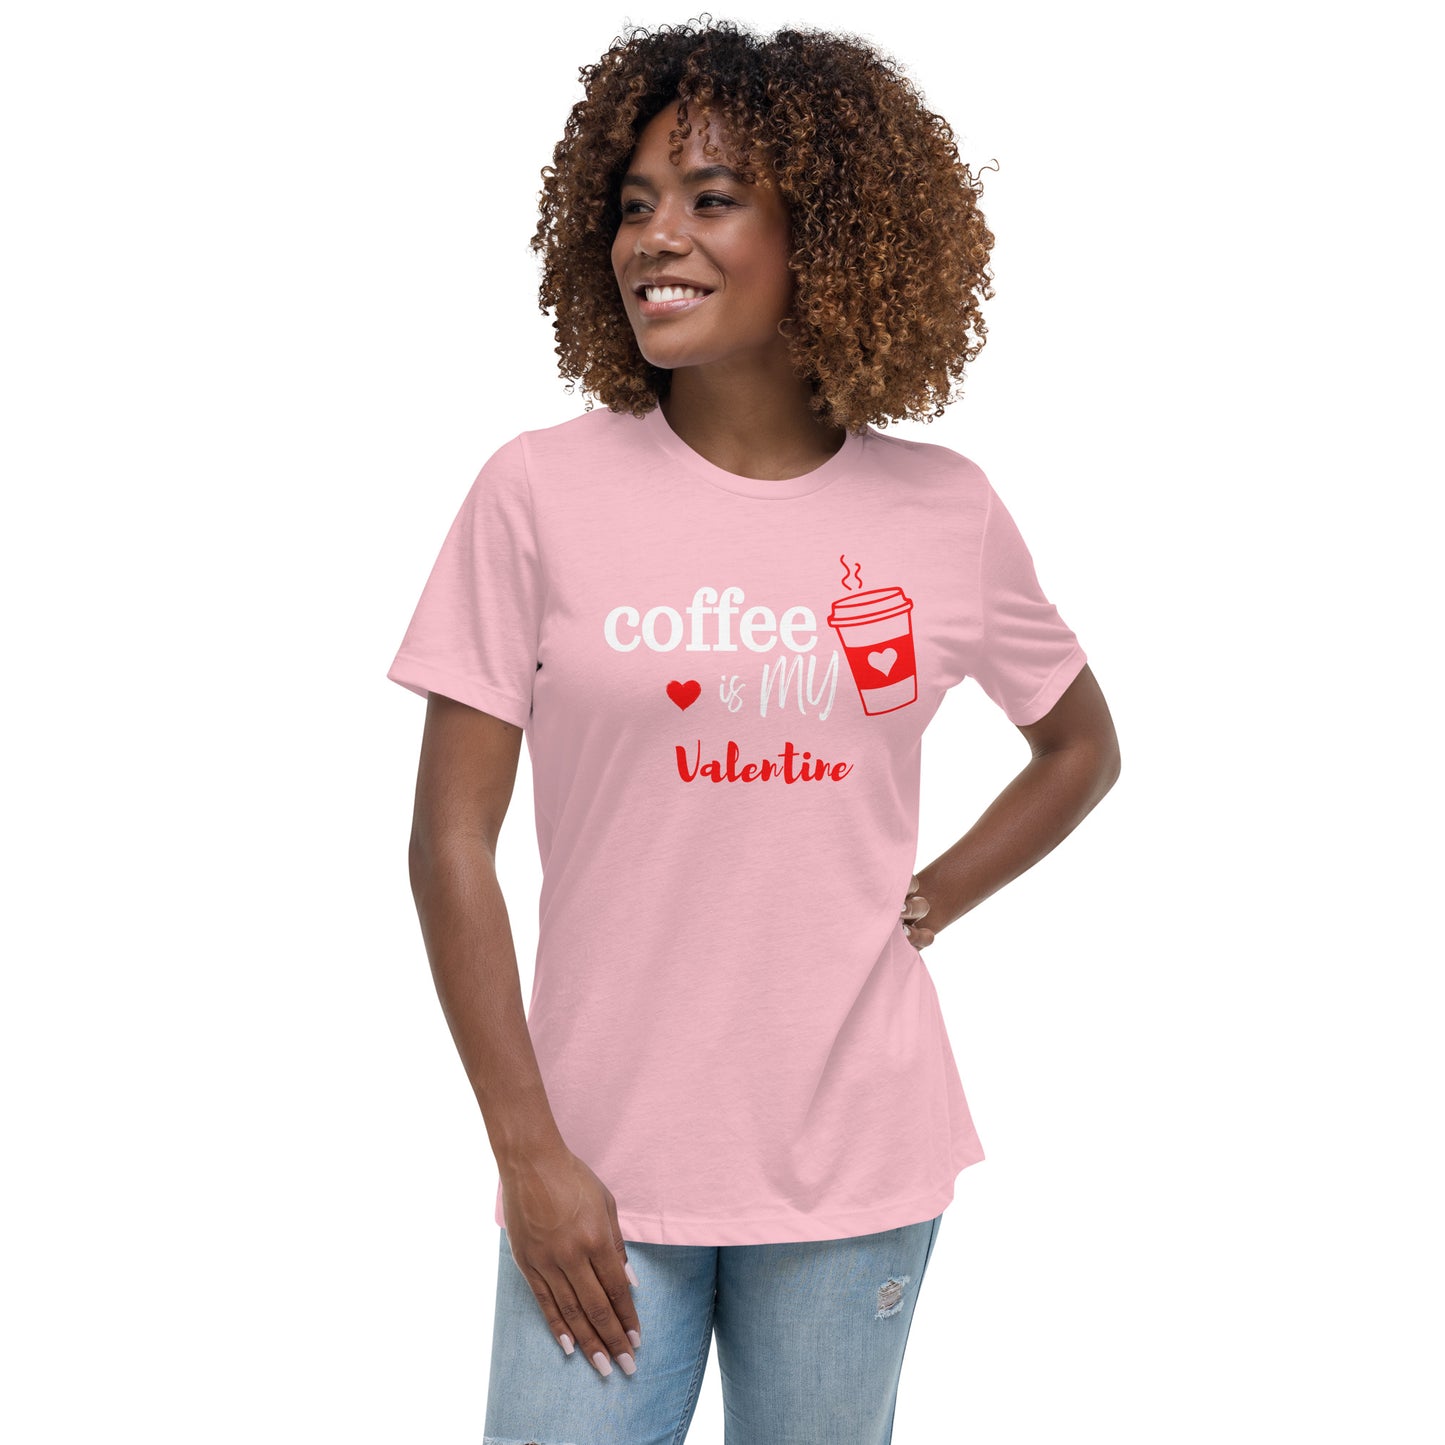 Coffee is my Valentine - Women's Relaxed T-Shirt (Bella + Canvas)